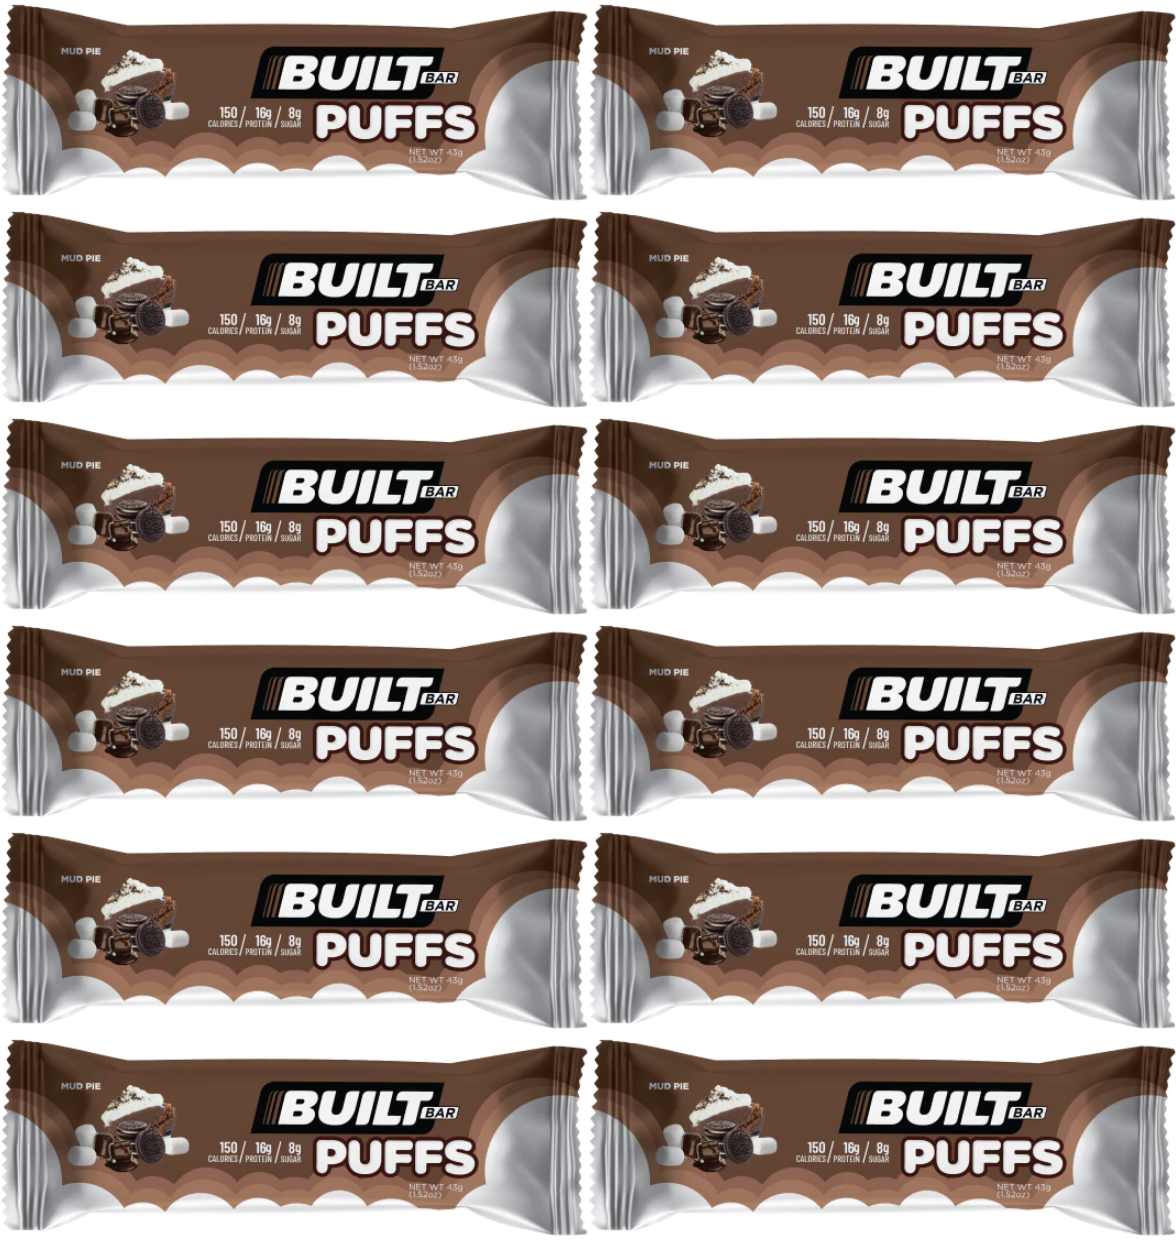 Built Bar Protein Puffs - Mud Pie - High-quality Protein Bars by Built Bar at 